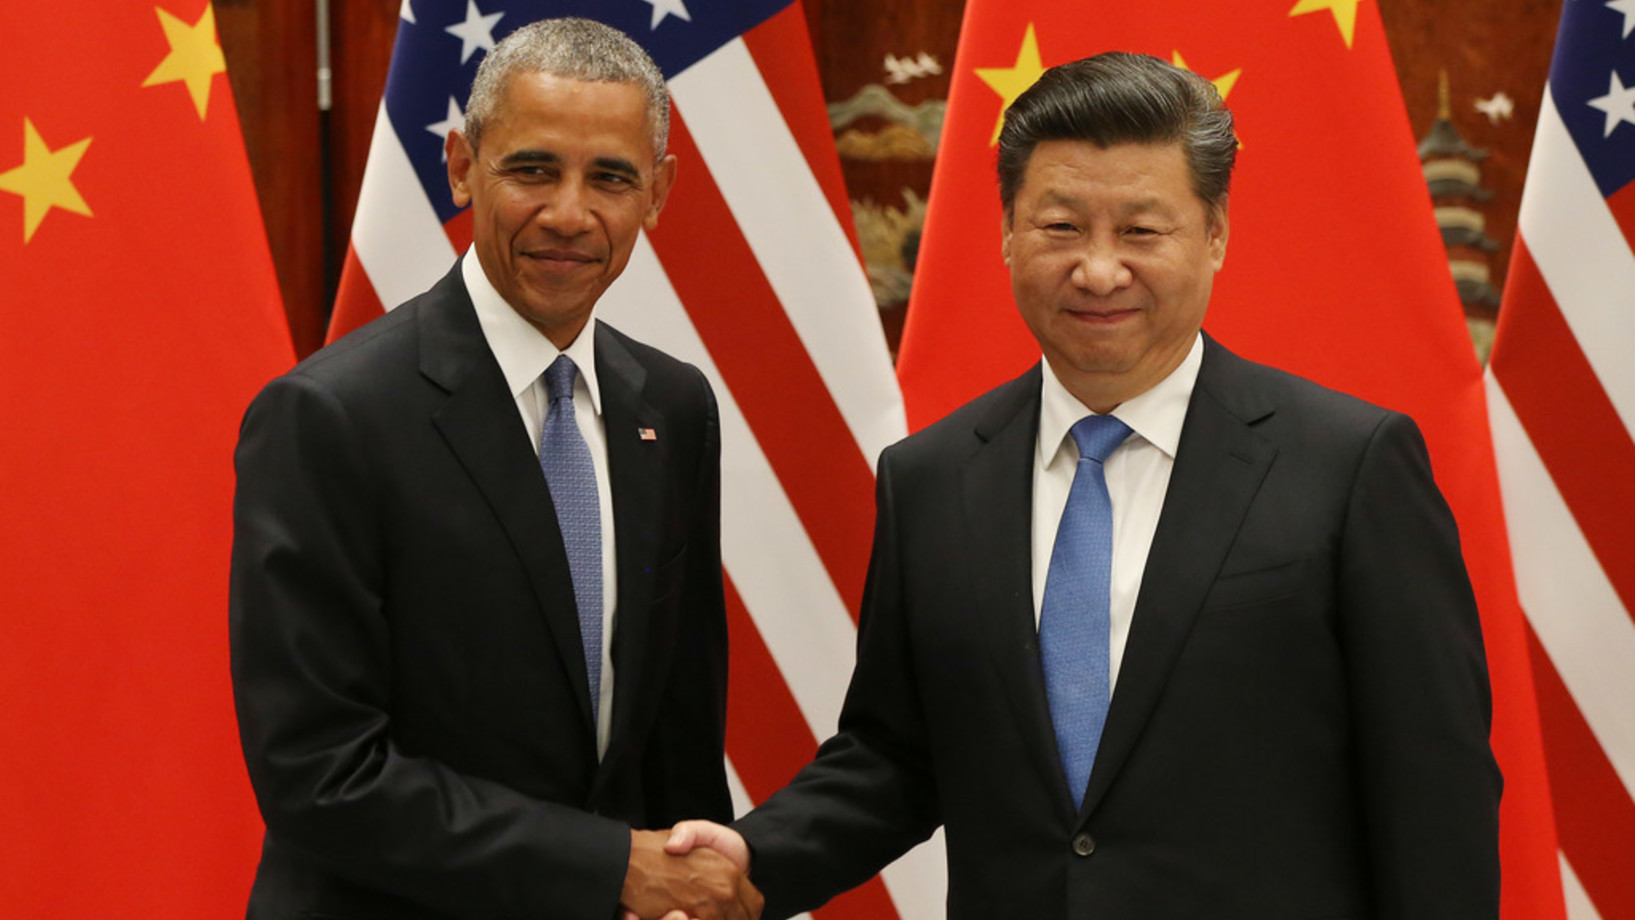 Obama und Xi Jinping am Samstag im West Lake Stat Guest House in Hangzhou (Foto: Keystone/How Hwee Young/AP)